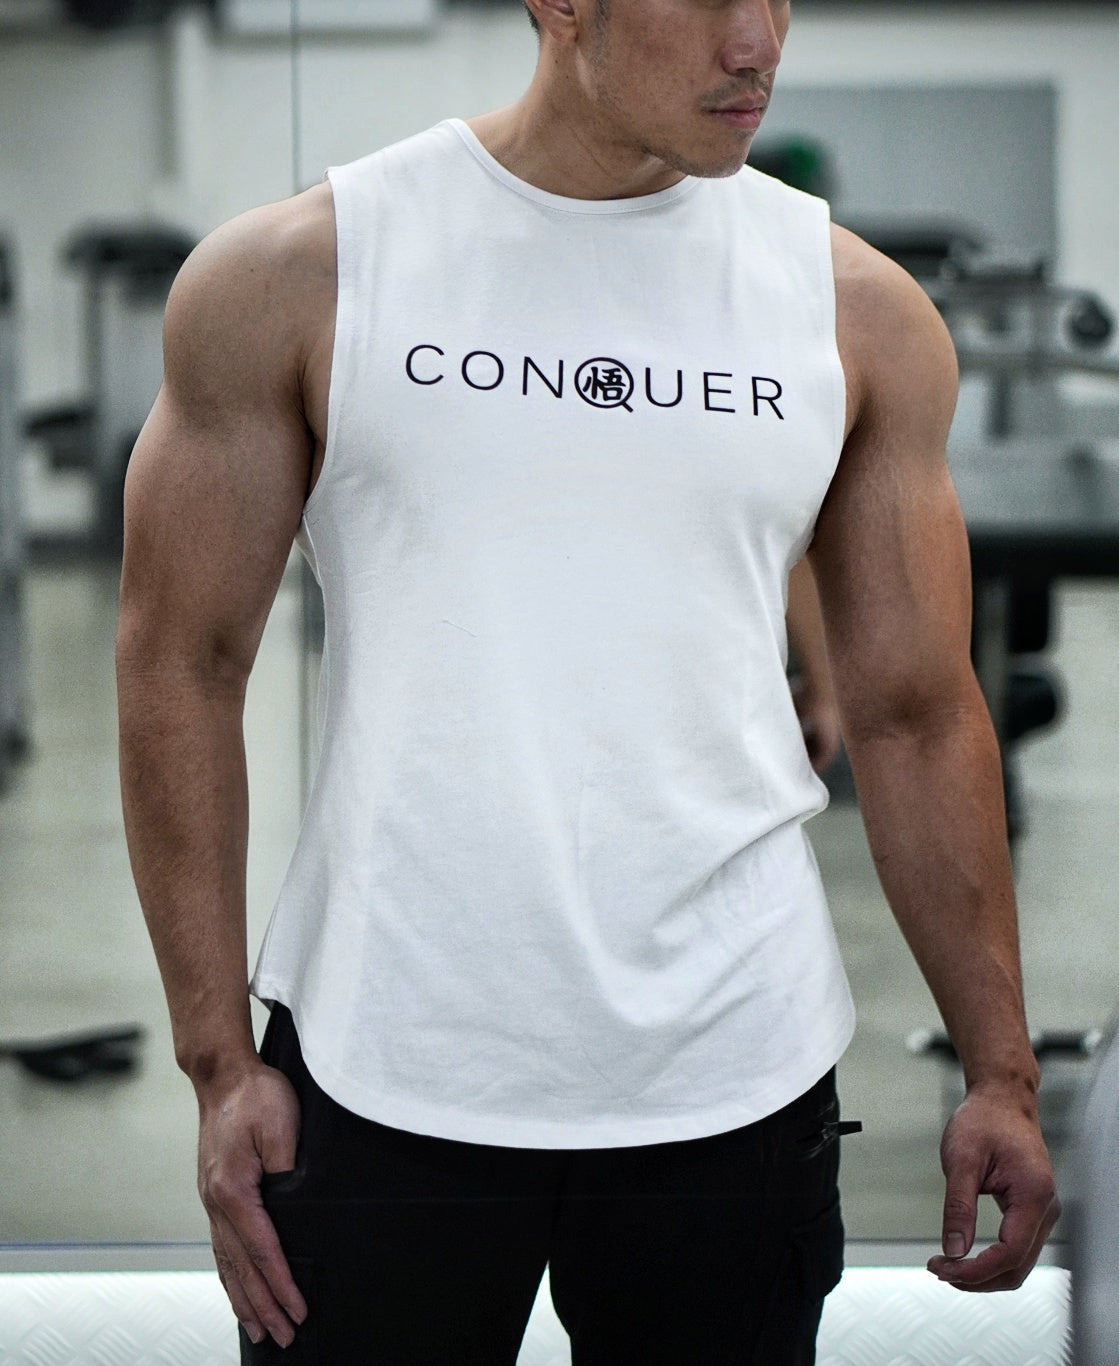 [NEW ARRIVAL] 'CONQUER' Muscle Shirt - White